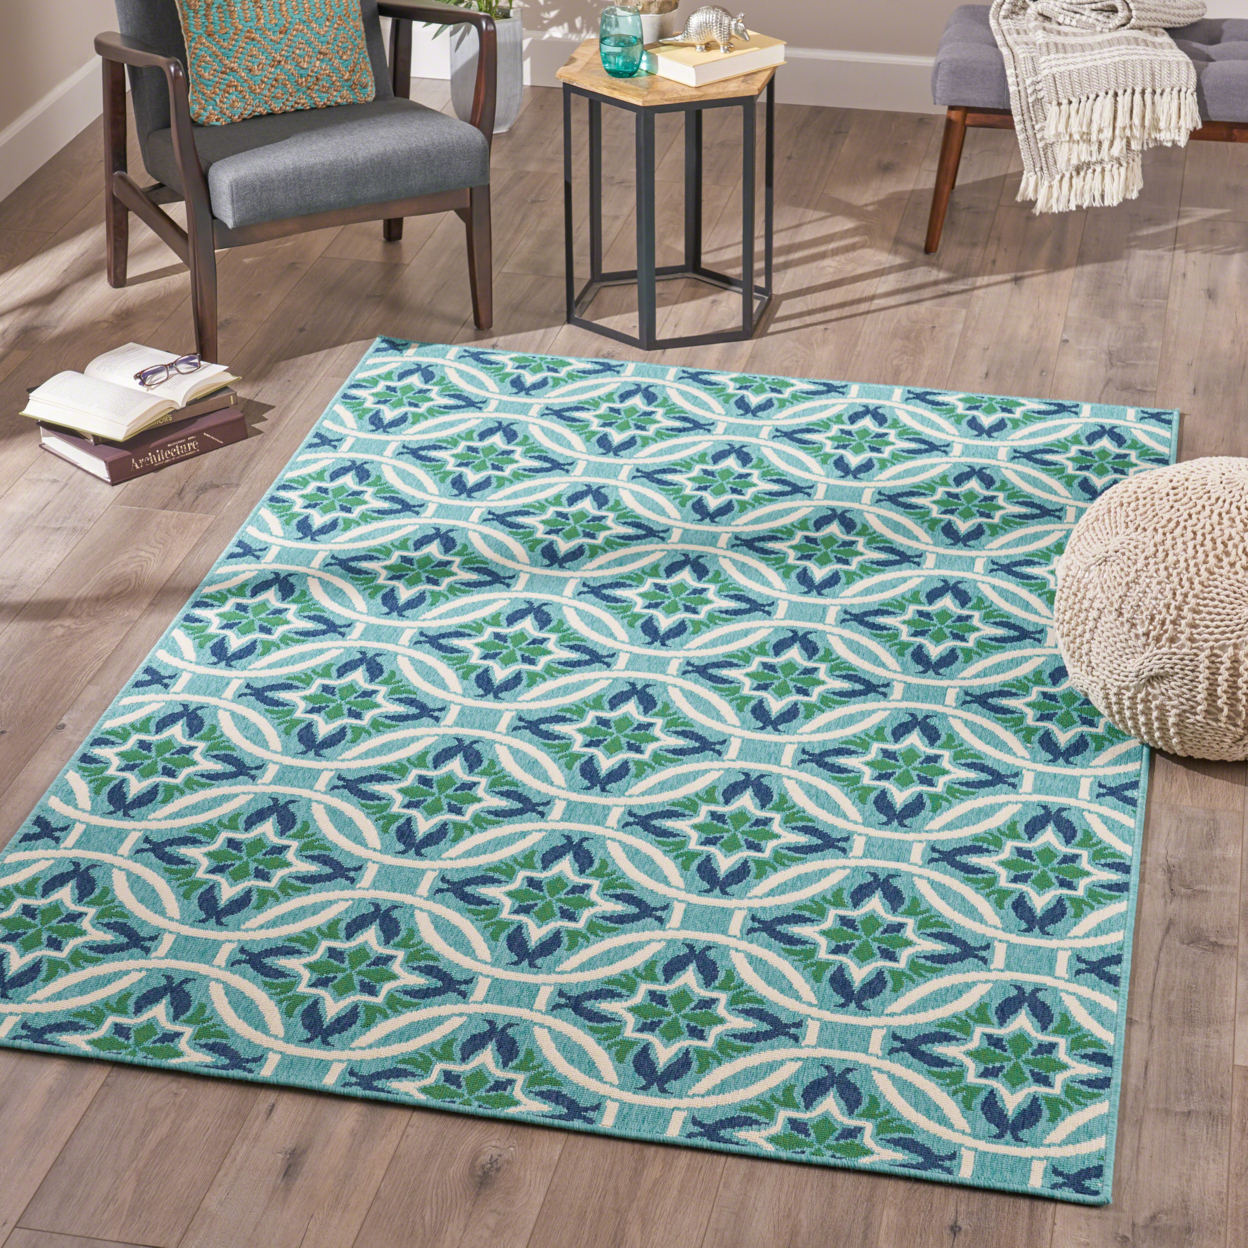 Jack Indoor Geometric Area Rug, Blue And Green - Blue + Green, 8' X 11'